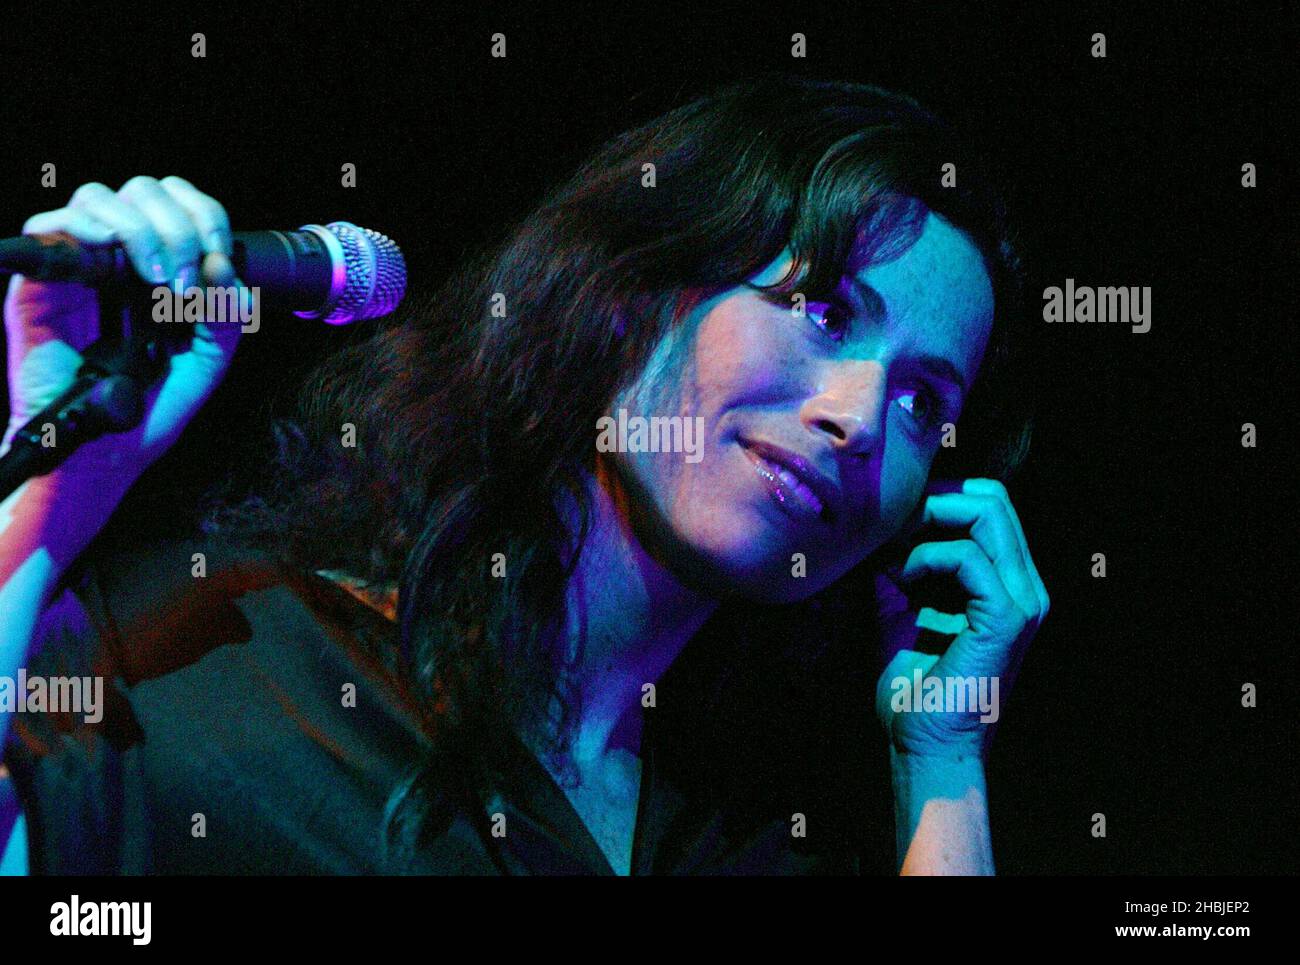 Hollywood actress turned singer/songwriter Minnie Driver supports Neil and Tim Finn during the final dates of their UK tour at the Carling Apollo Hammersmith on November 6, 2004 in London. Stock Photo